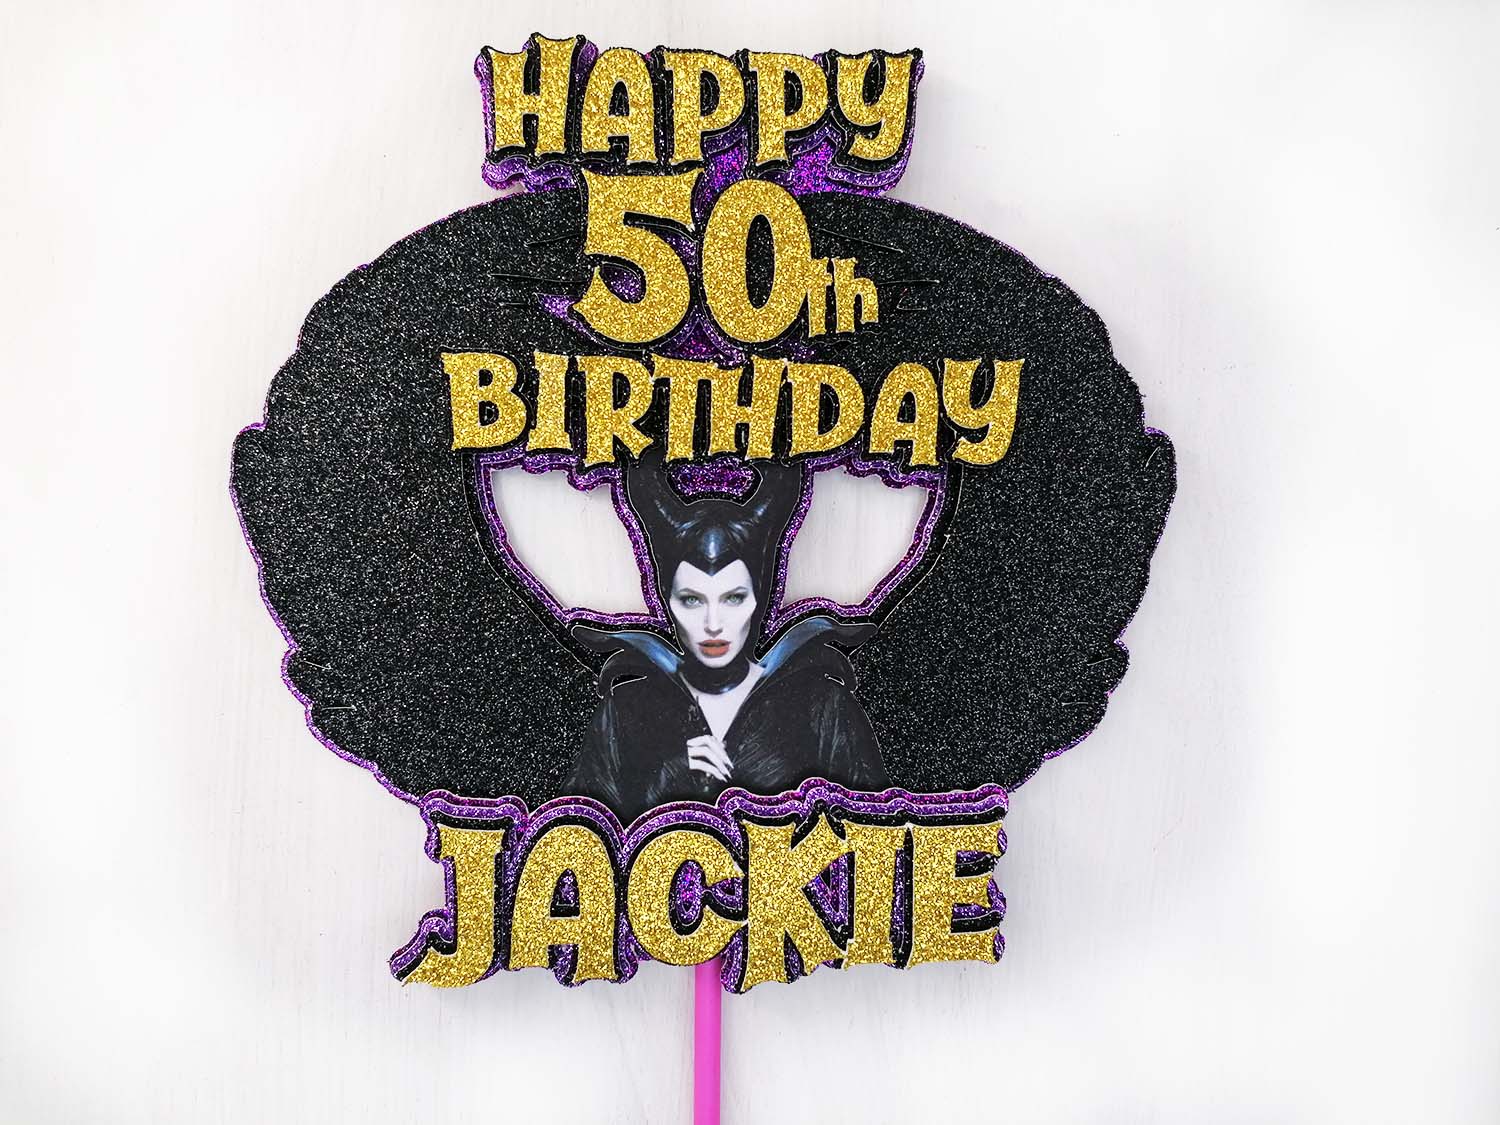 Maleficent 3D cake sign - made in Ireland